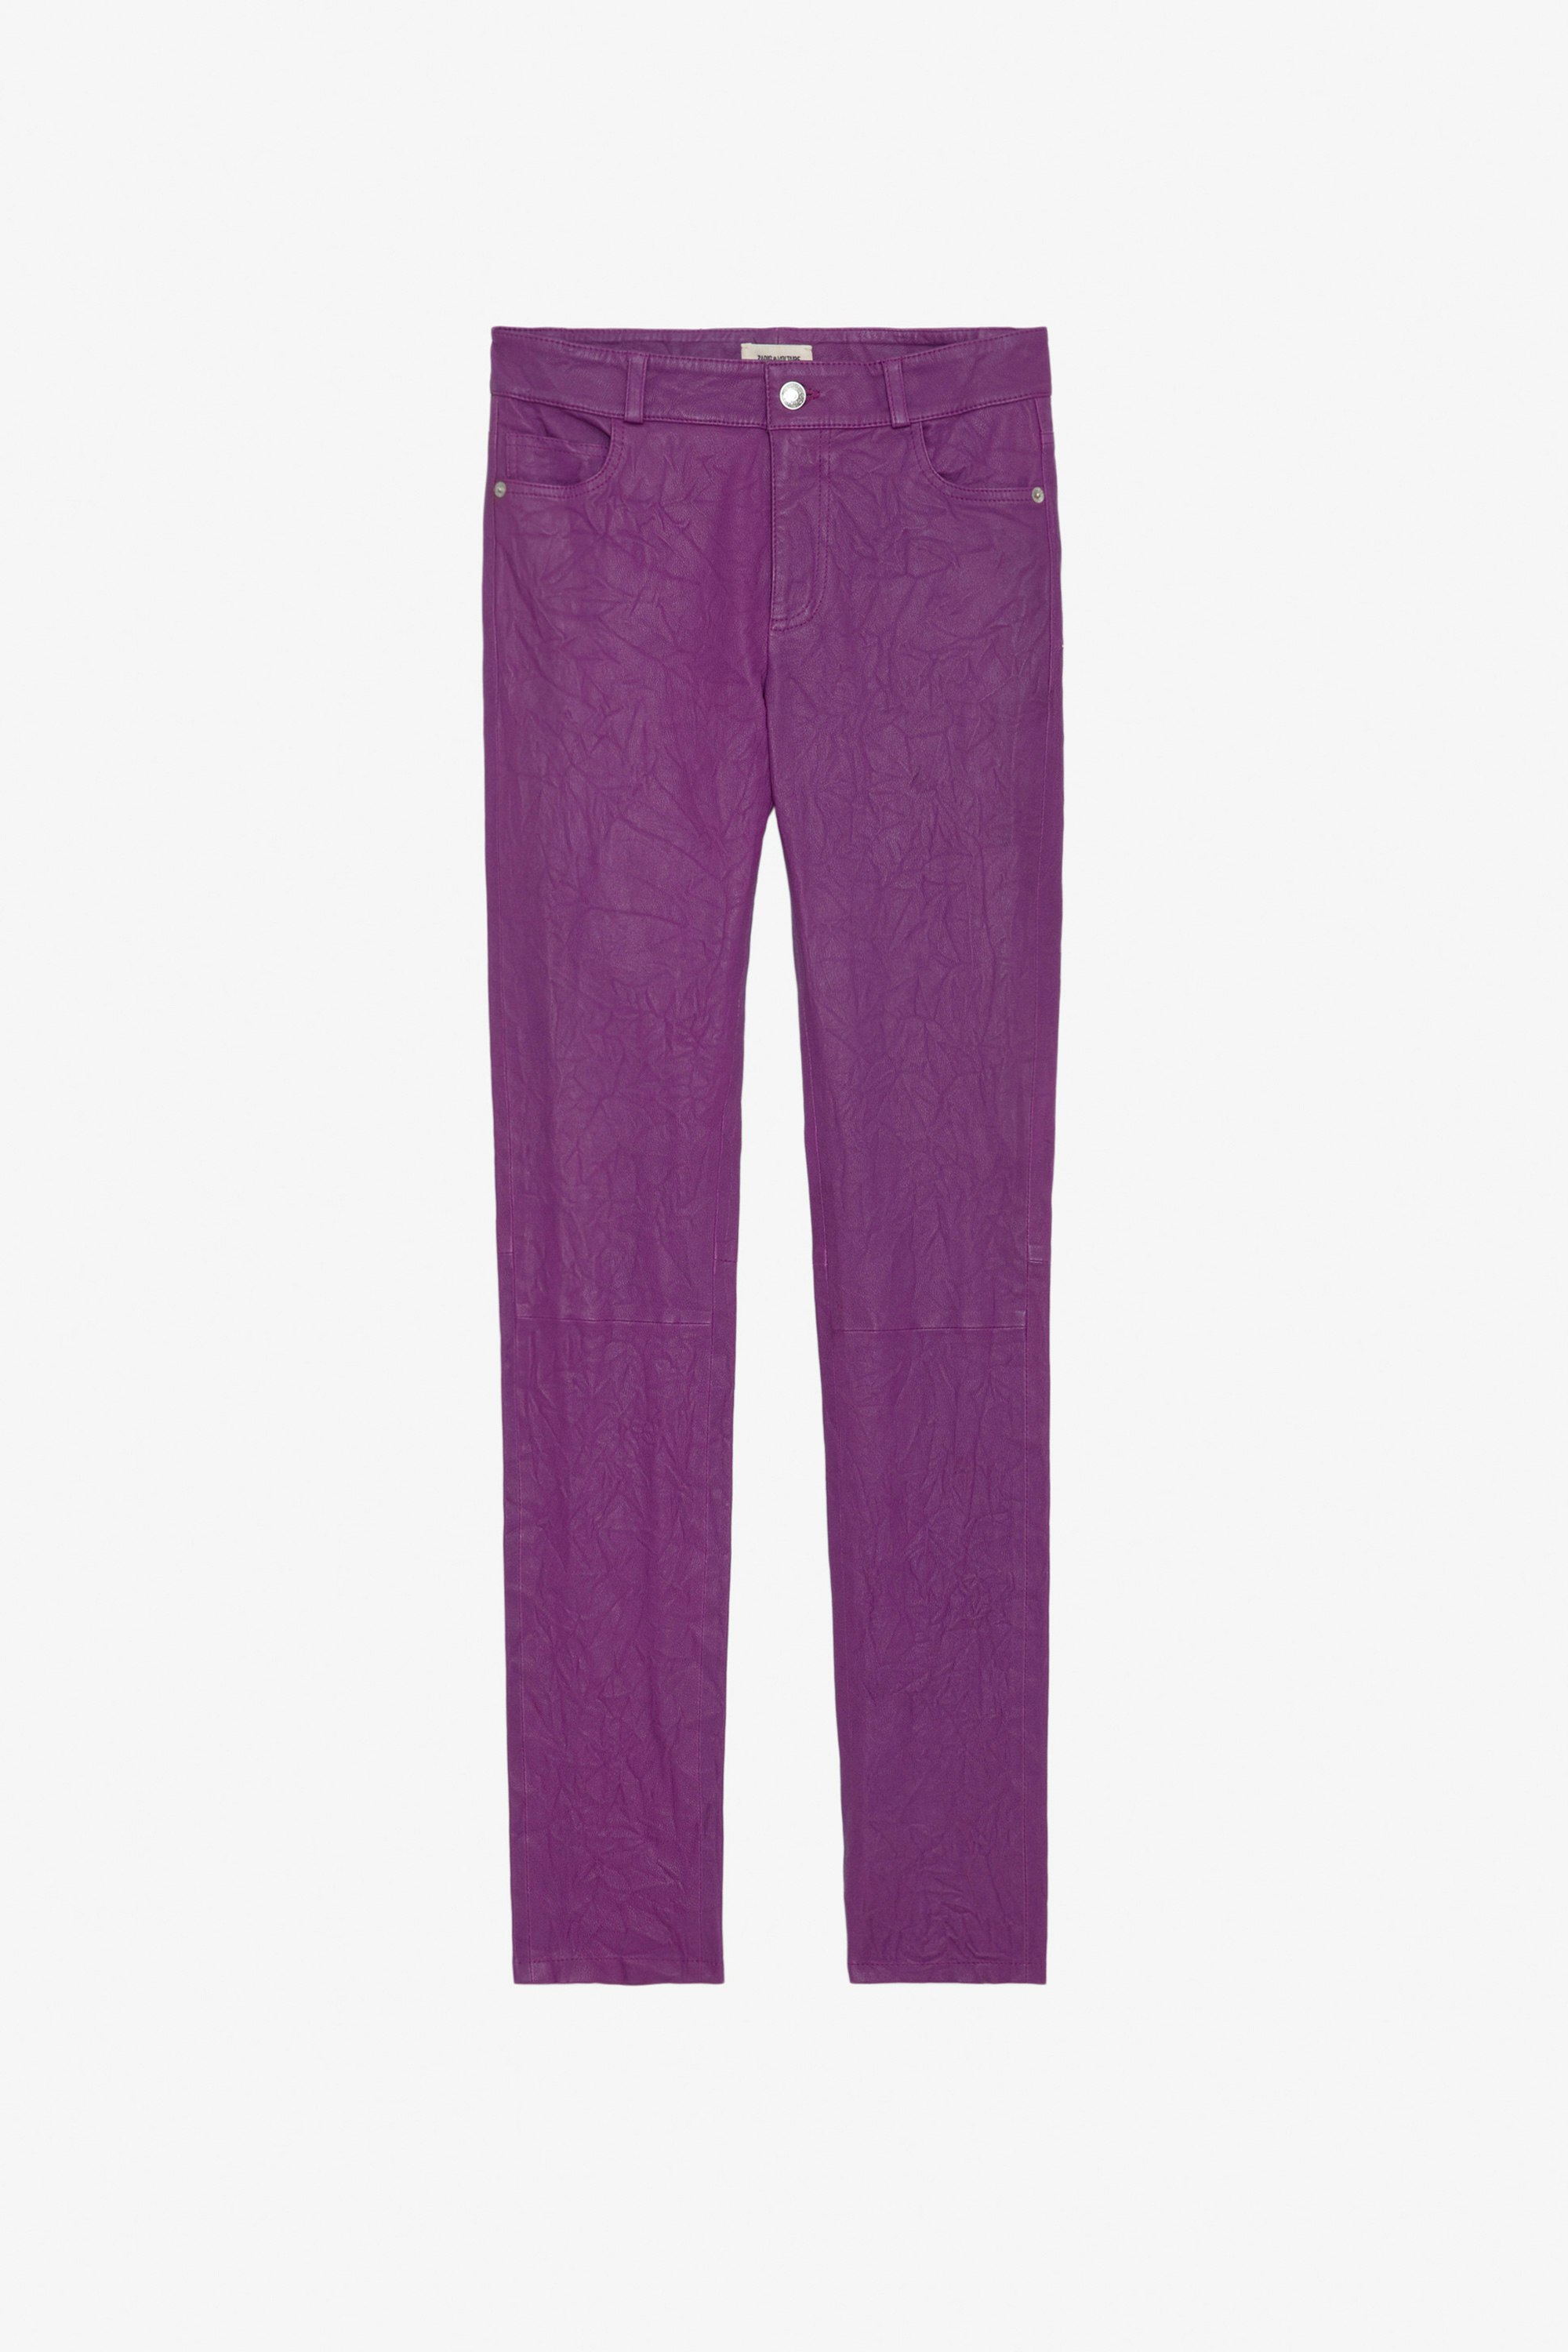 Phlame レザーパンツ - Purple crinkled leather trousers with pockets.